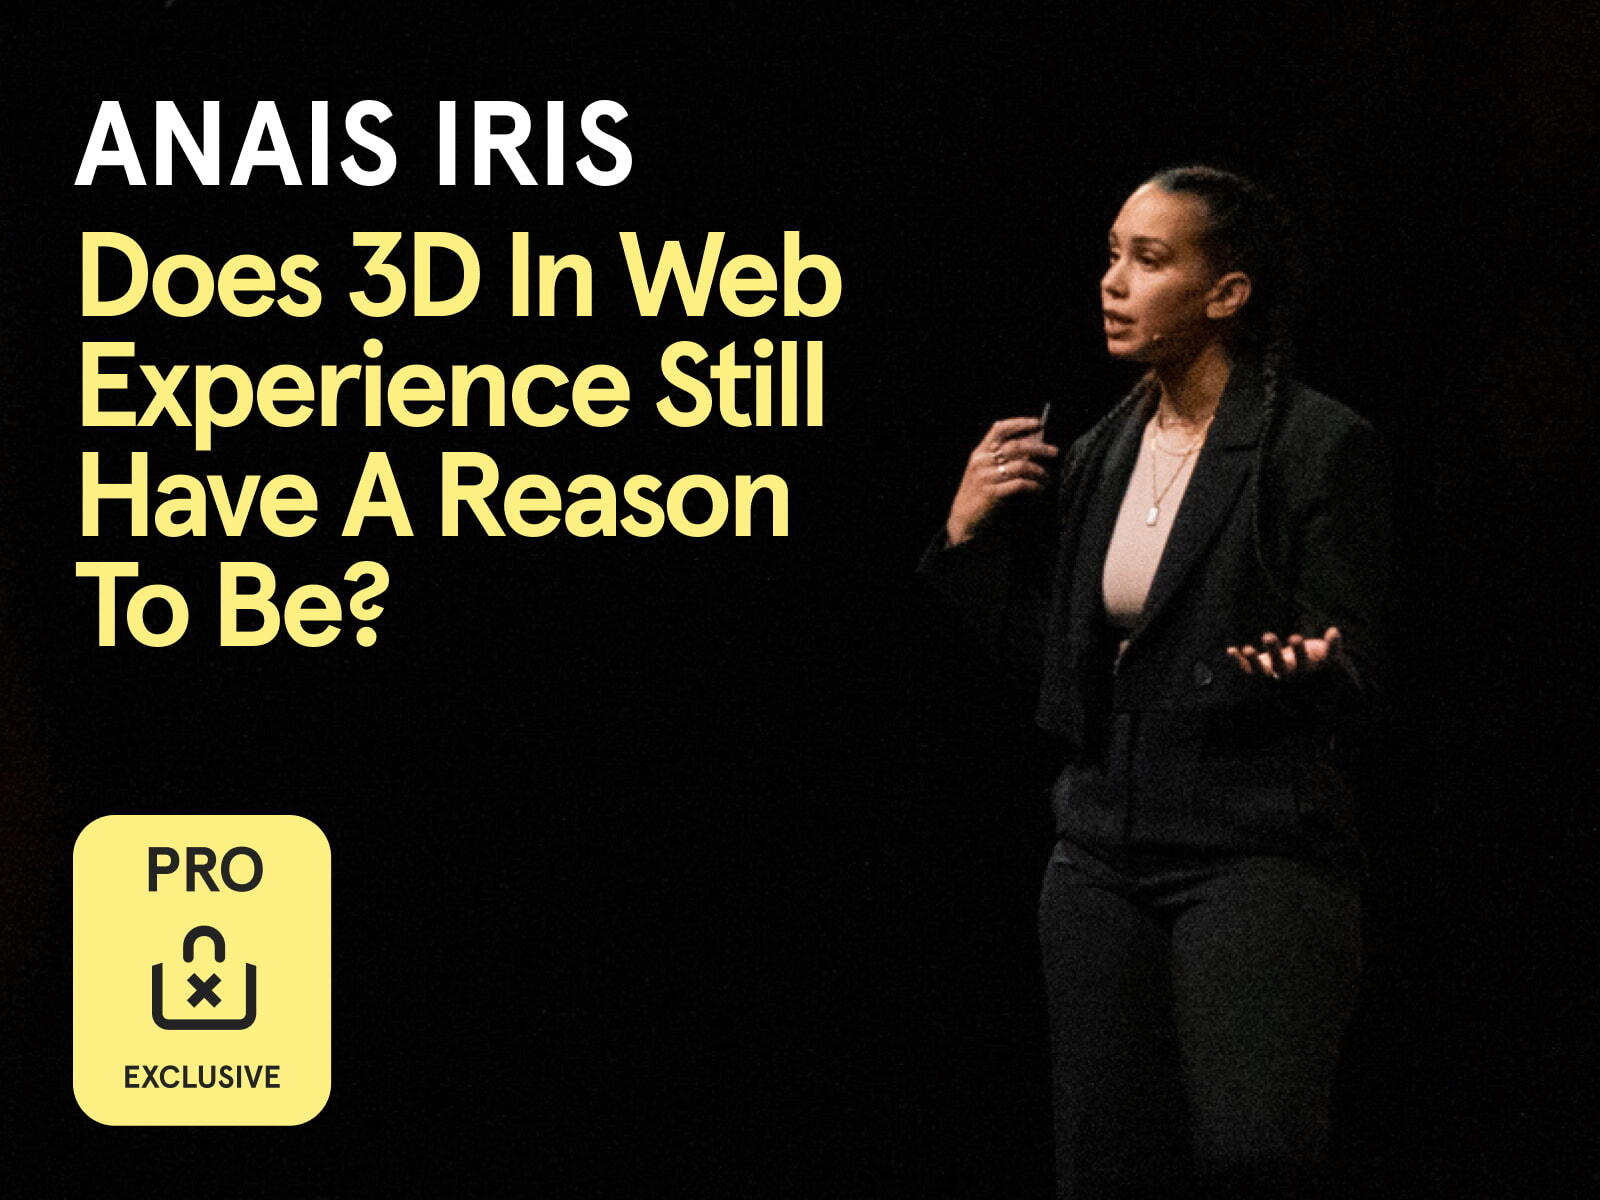 New PRO Content available: watch Anais Iris's new talk from Awwwards Conference Amsterdam